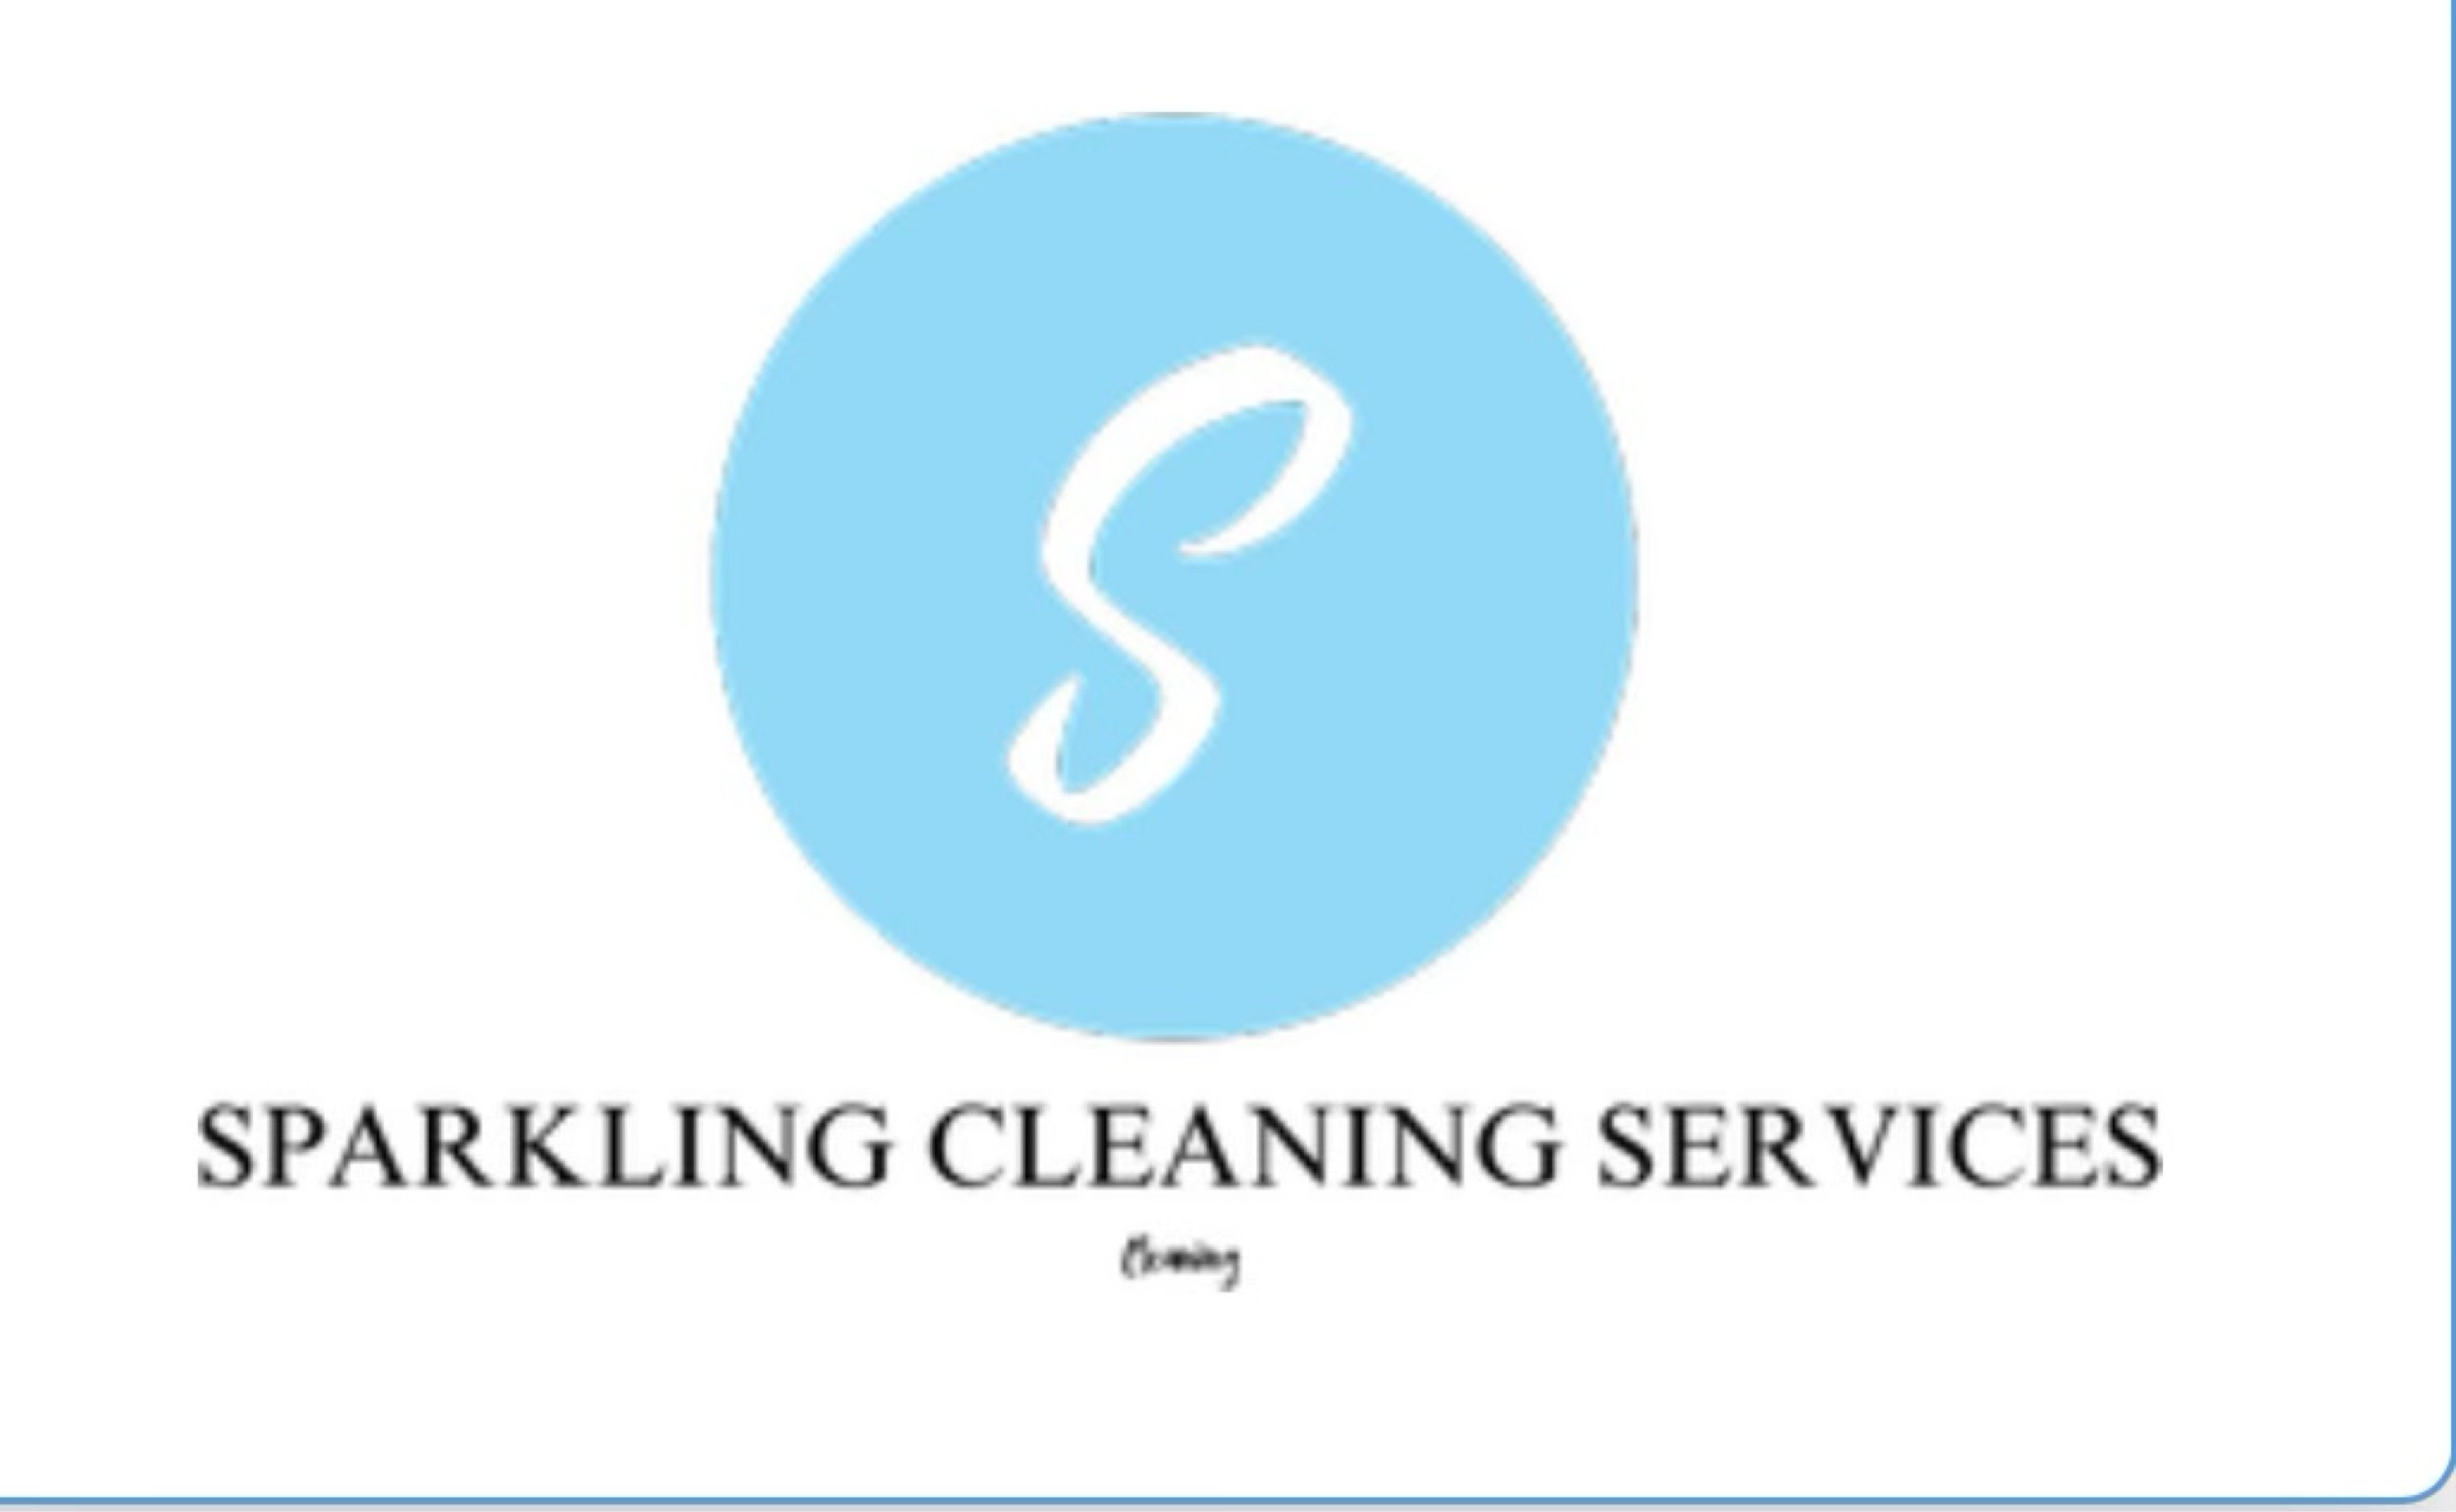 Sparkling Cleaning Service Logo